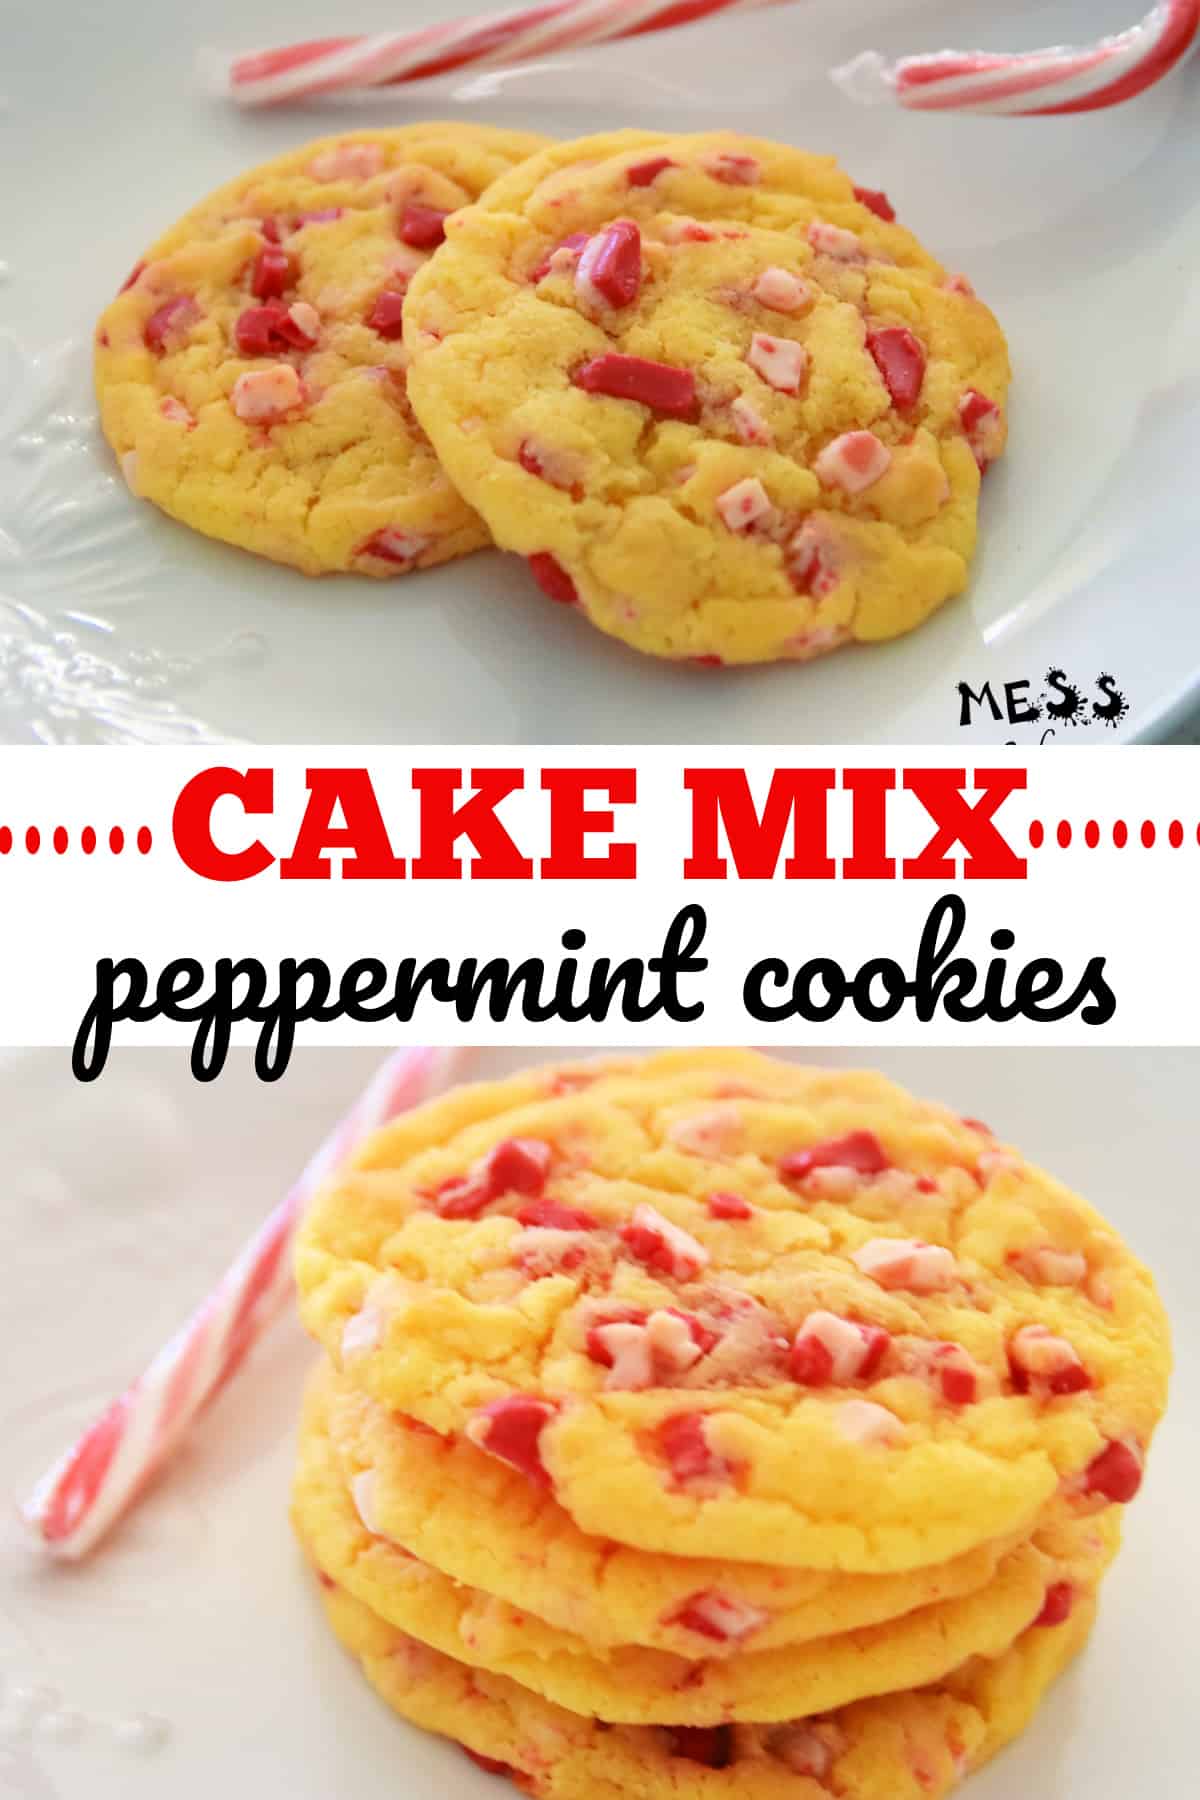 With just a few ingredients, you can bake up soft and delicious cookies that taste like a whole lot of work went into them. These Christmas Cake Mix Peppermint Cookies make the perfect holiday treat!